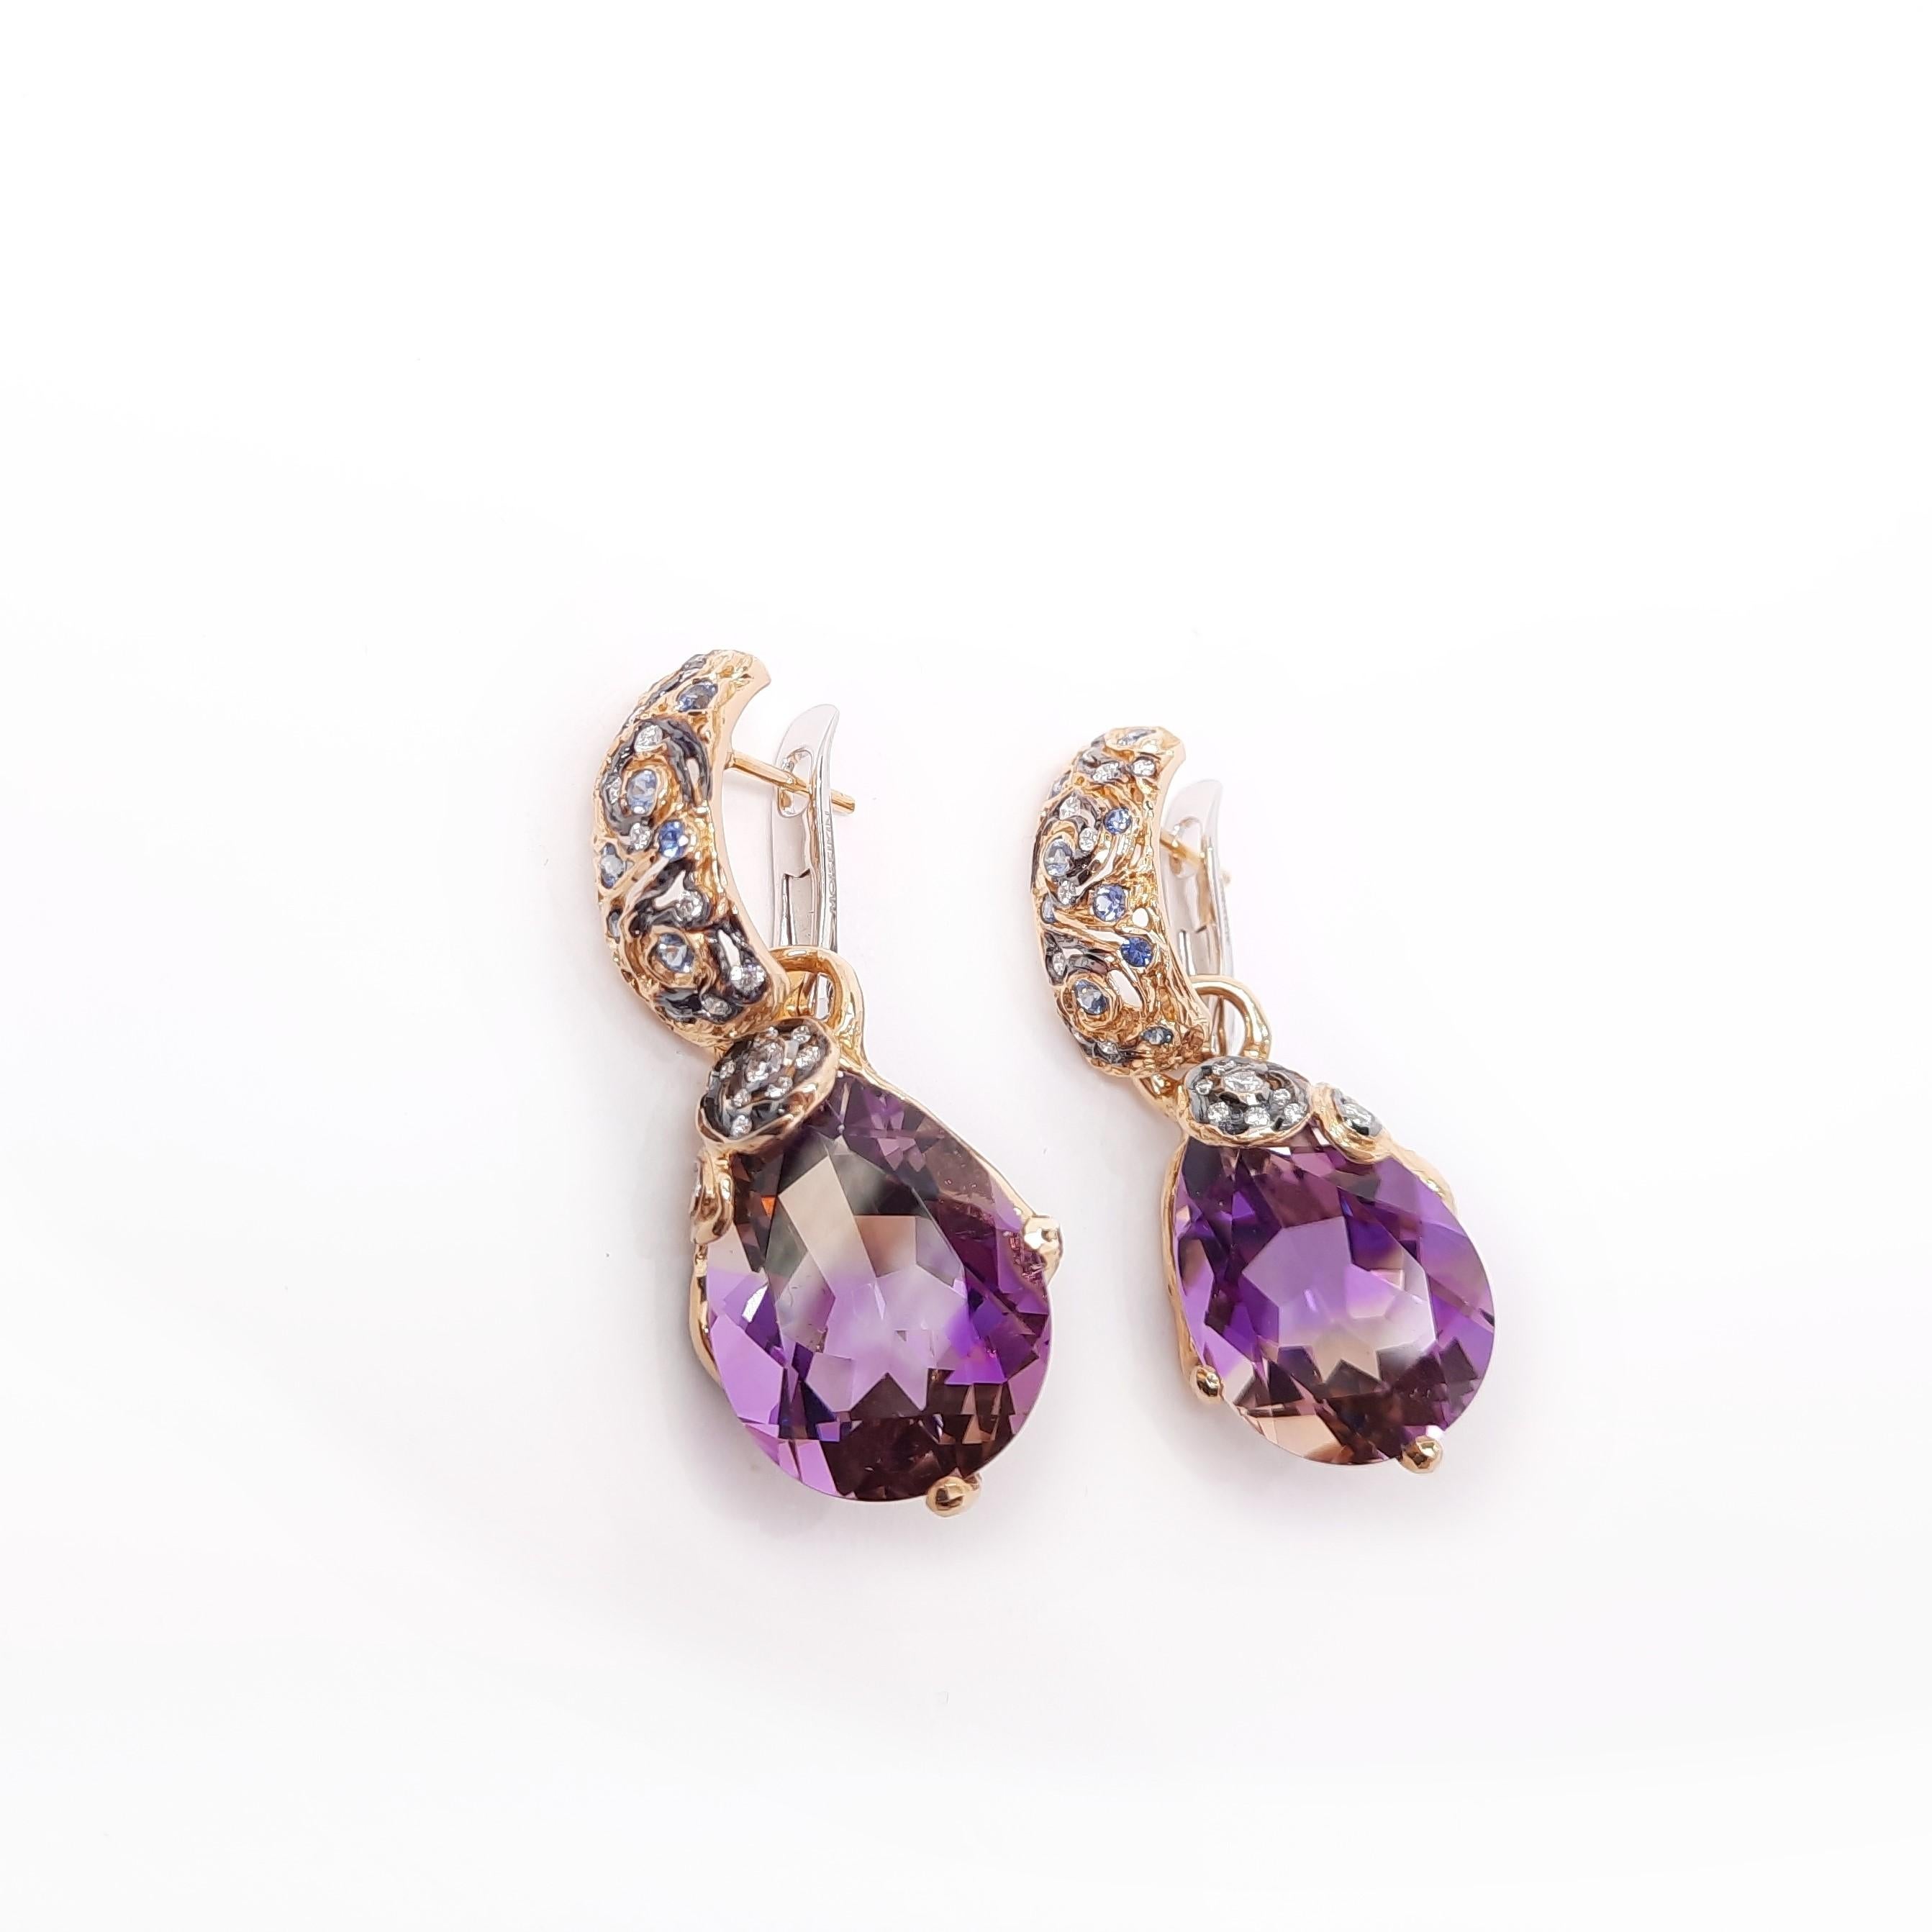 Inspired by impressionism and Starry Night by Vincent Van Gogh, MOISEIKIN® has created the swirling night sky image with intricate gold filigree, diamonds, sapphire and fancy ametrine illustrating mysterious night sky. The fashionable earrings have